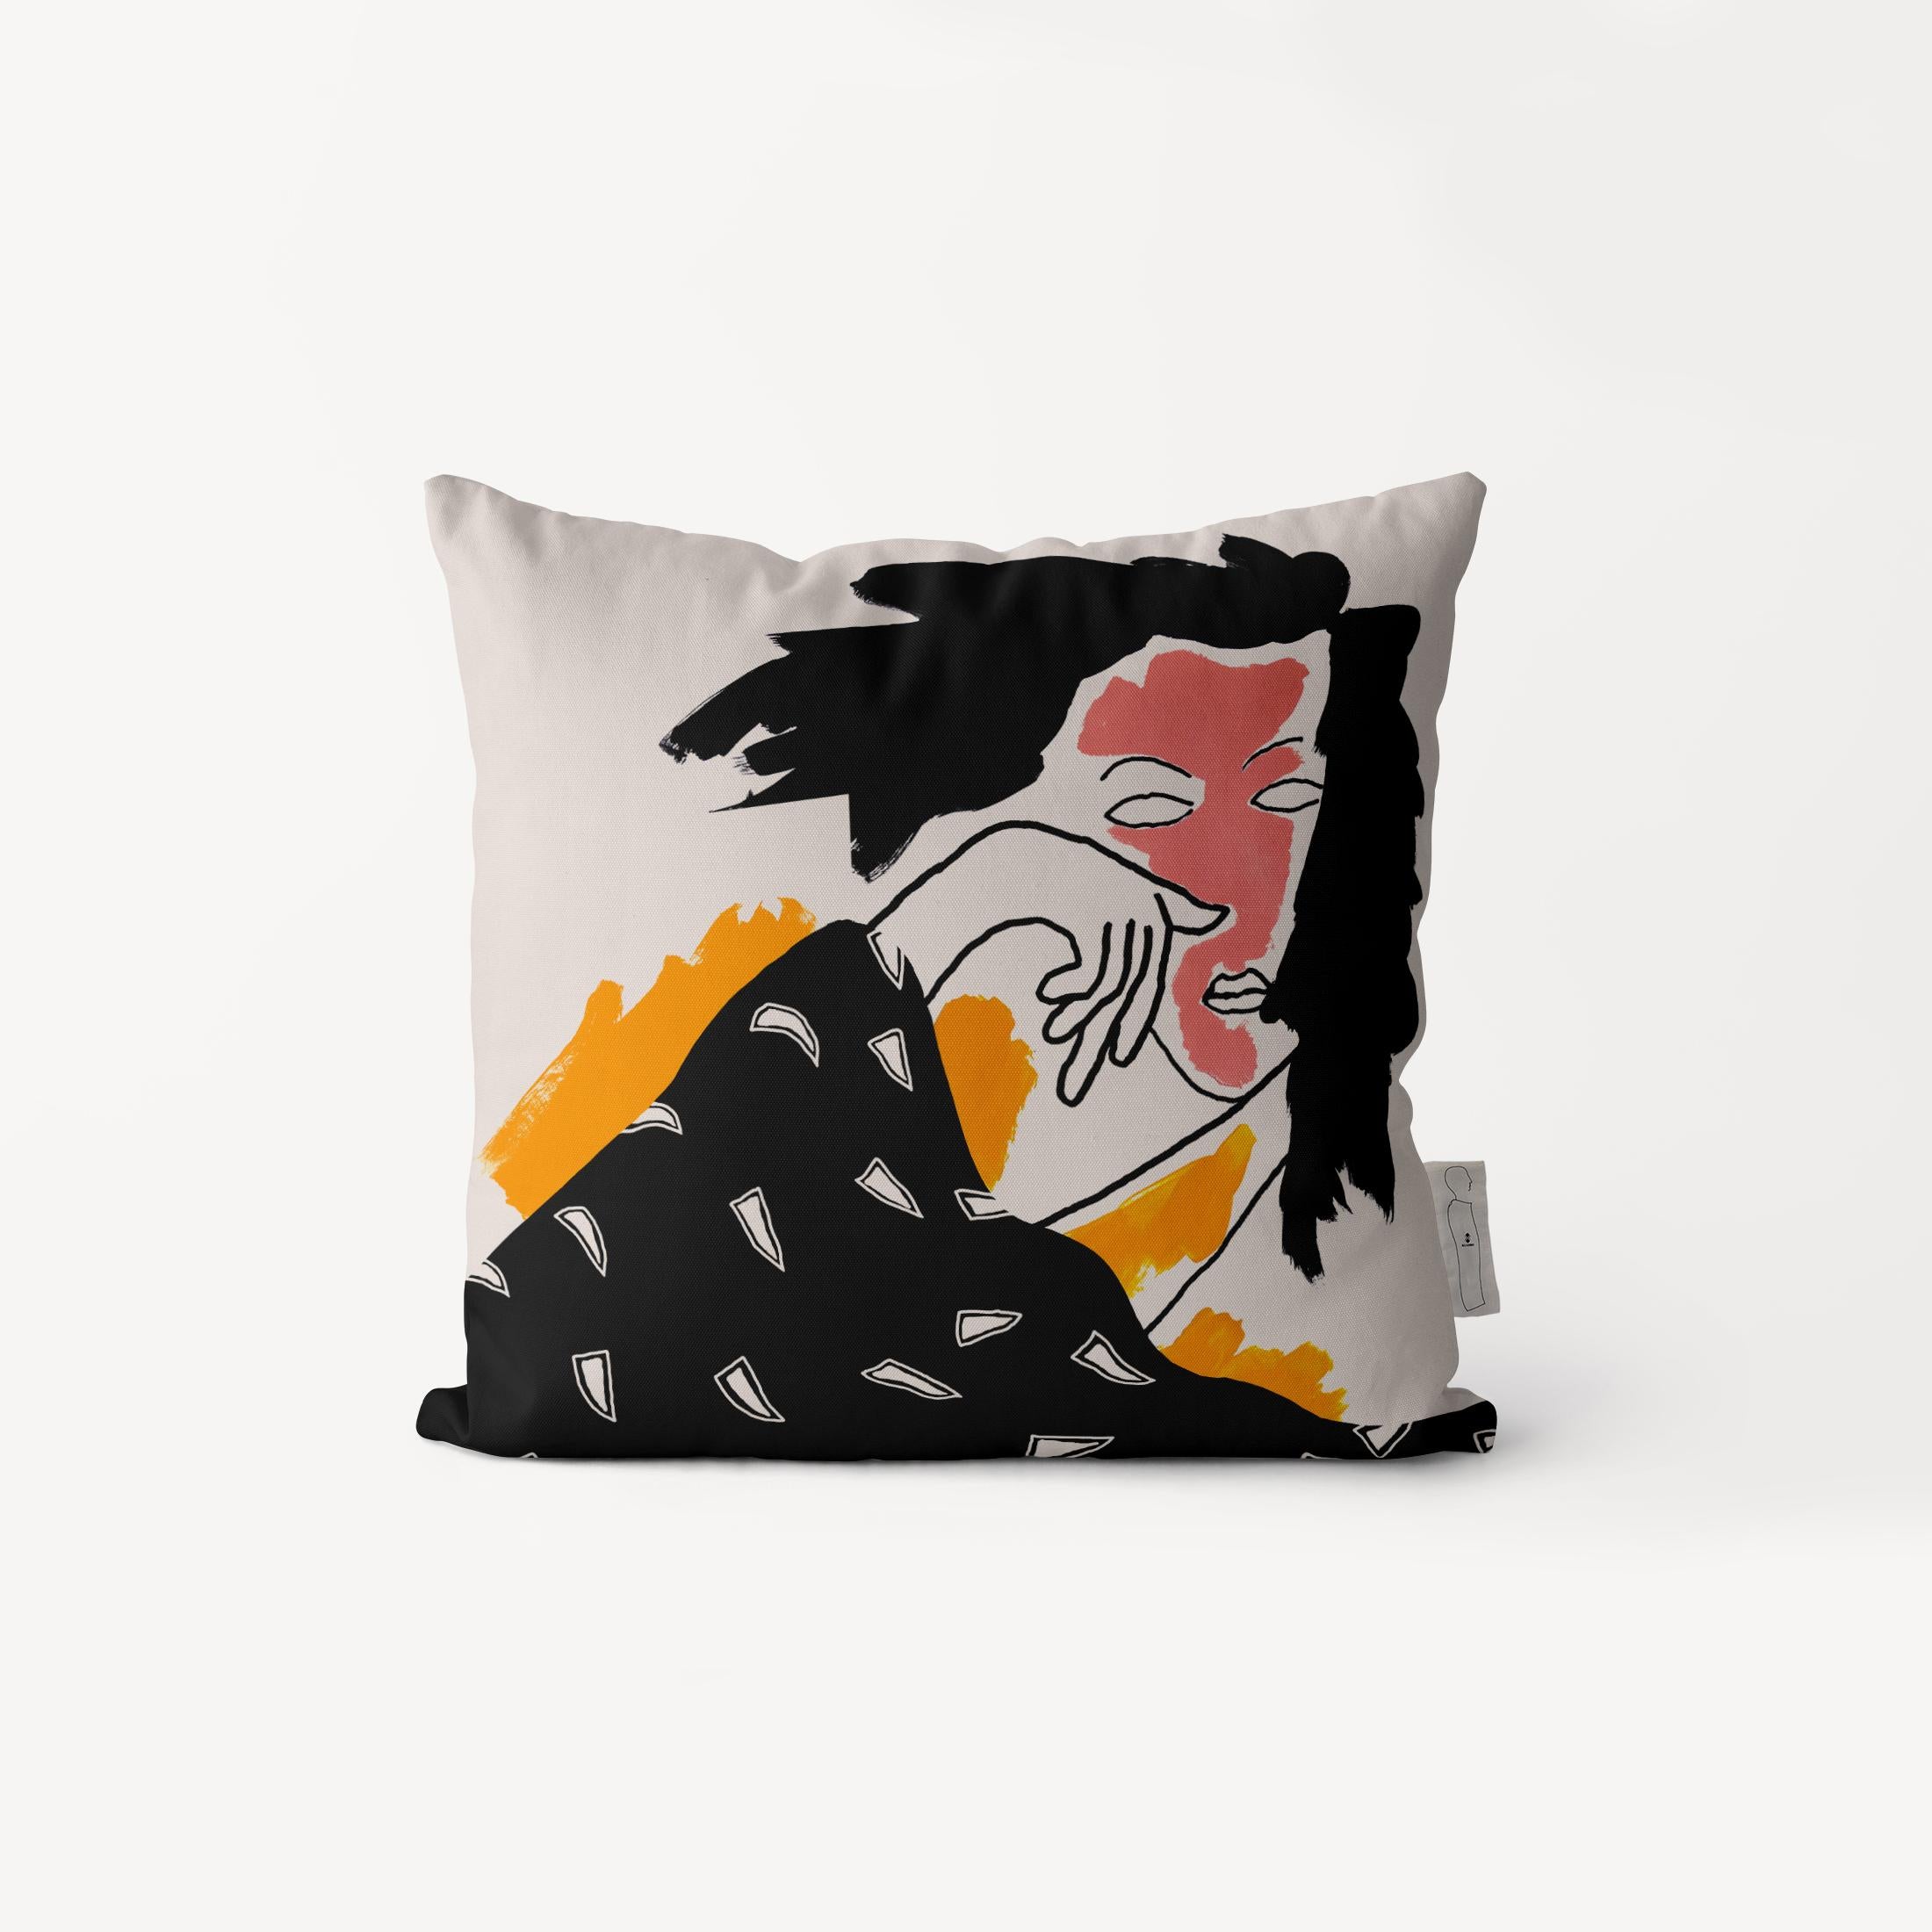 The pillow series titled 